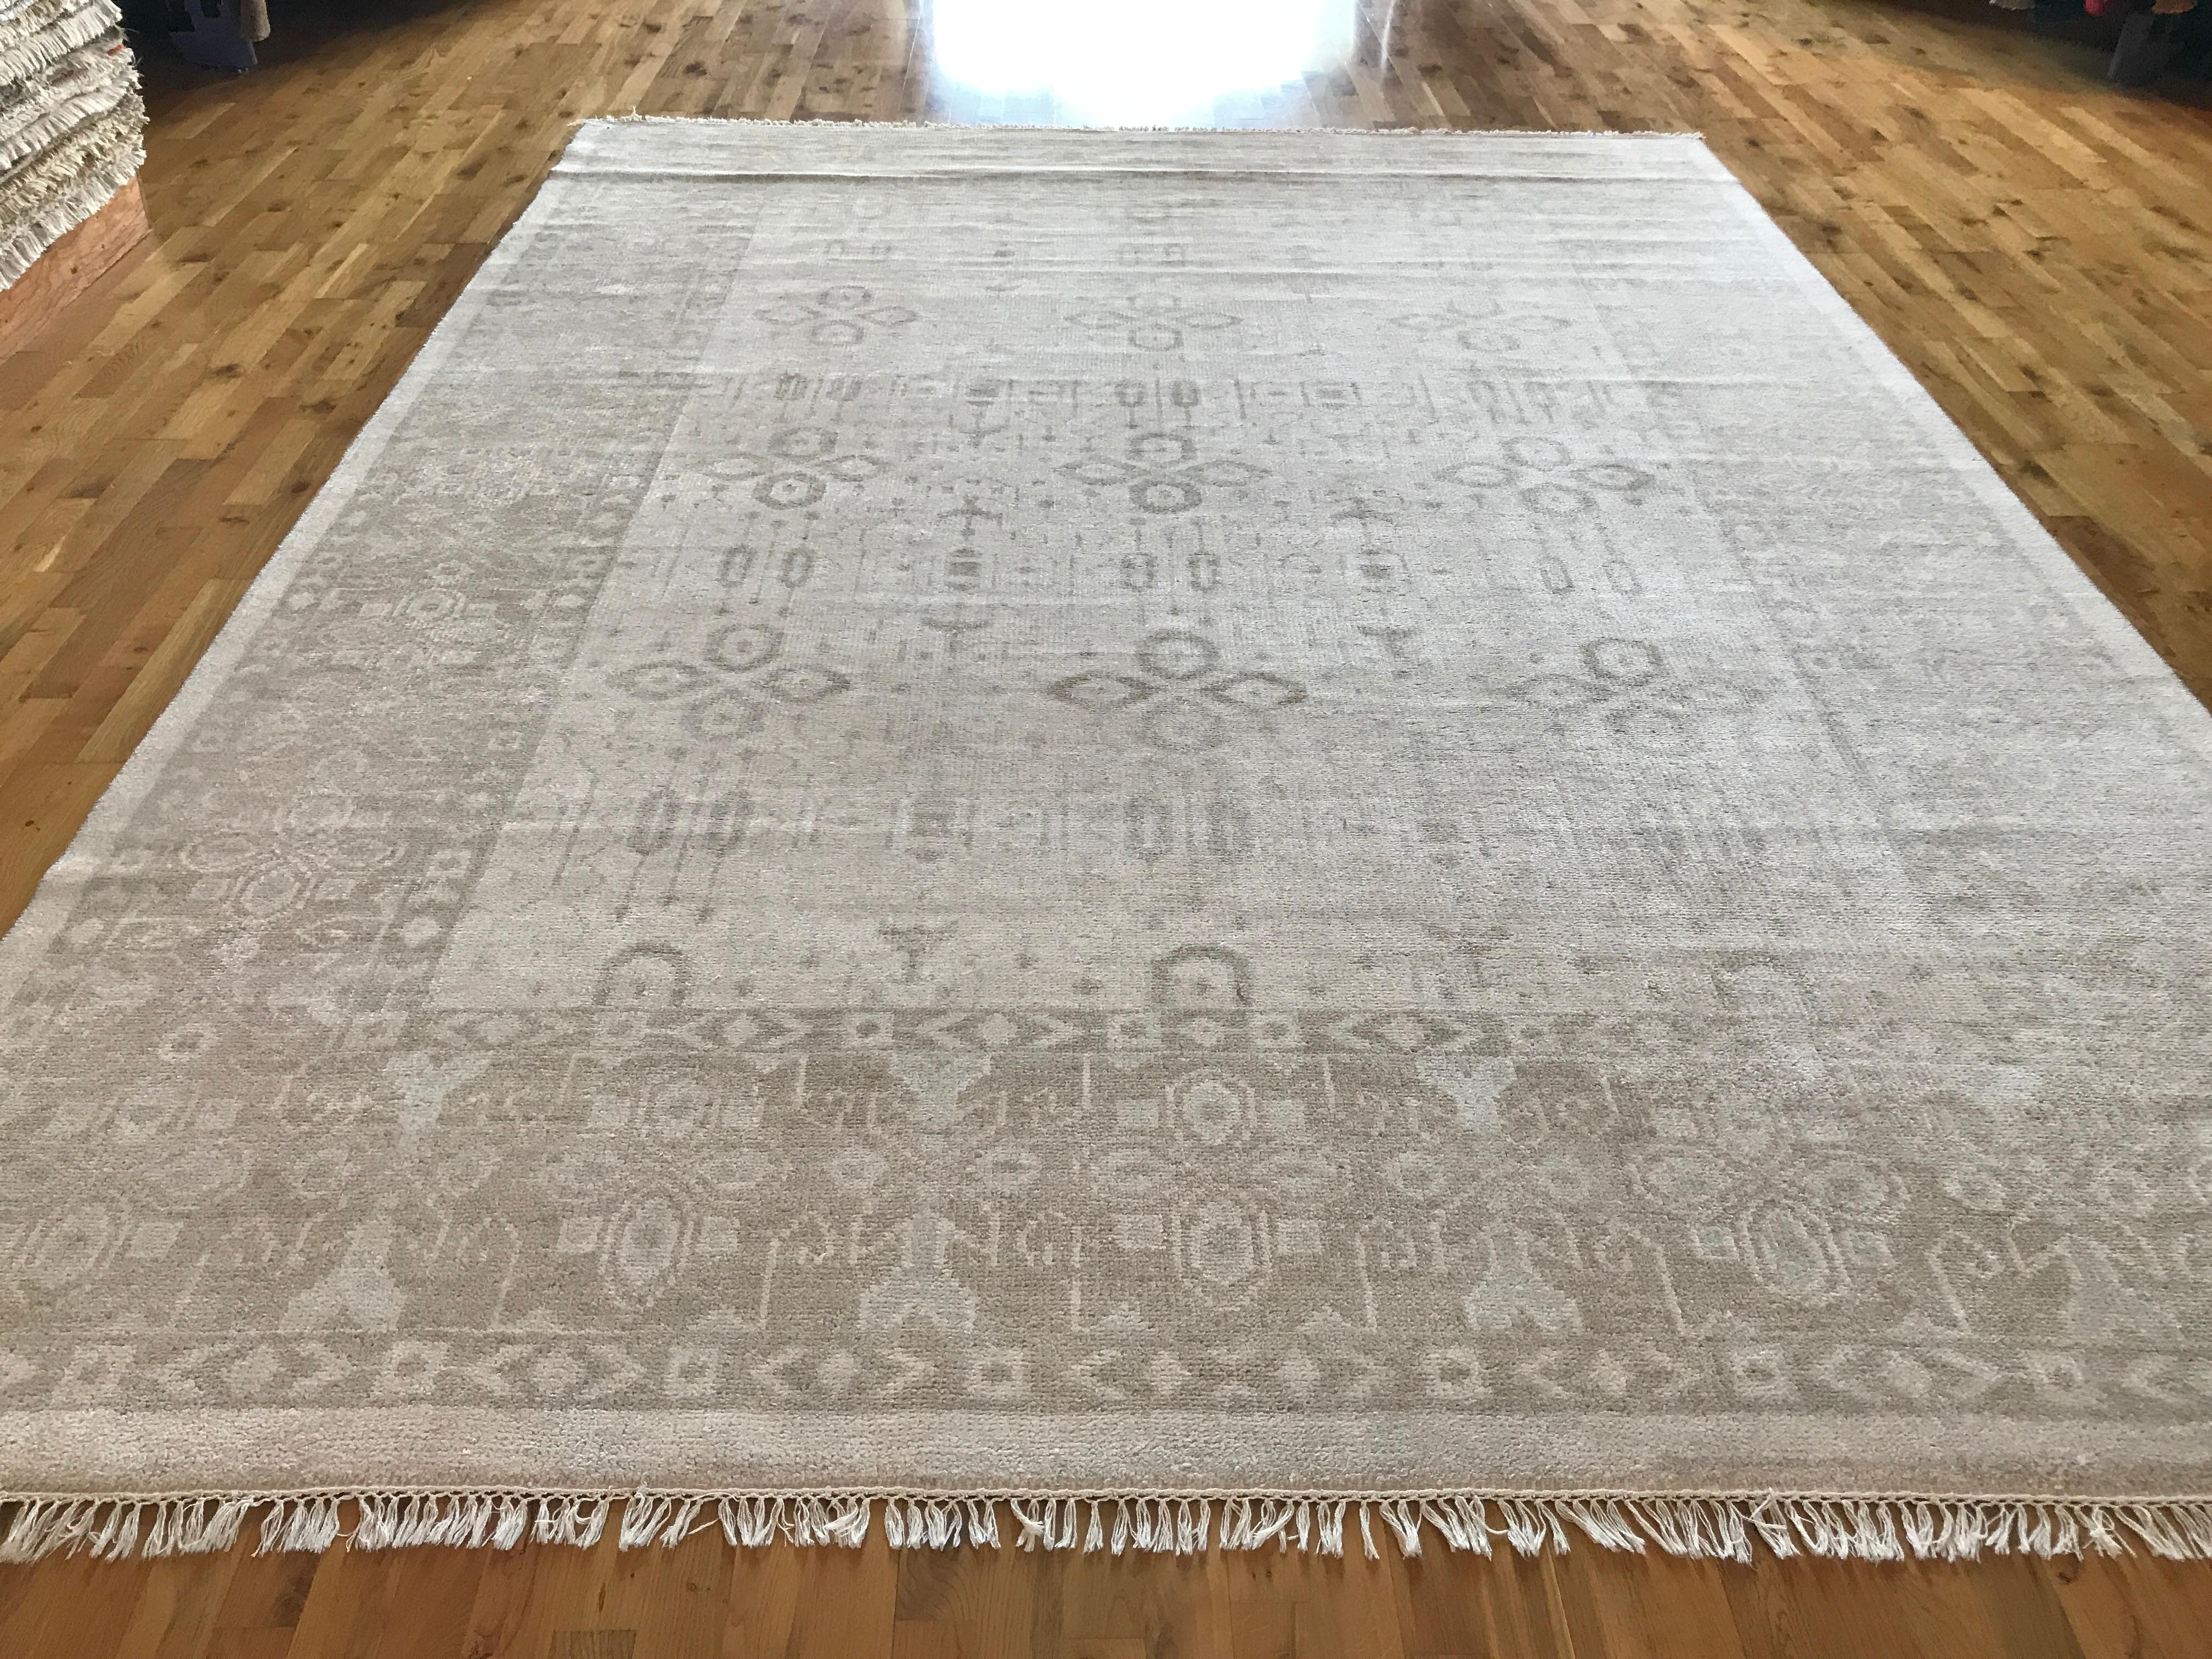 Traditional style rug with geometric and floral pattern that would be equally at home in a contemporary setting. Colors are light beige, ivory, dark beige, brown and hues of gray.

- All wool

- Hand knotted in India.